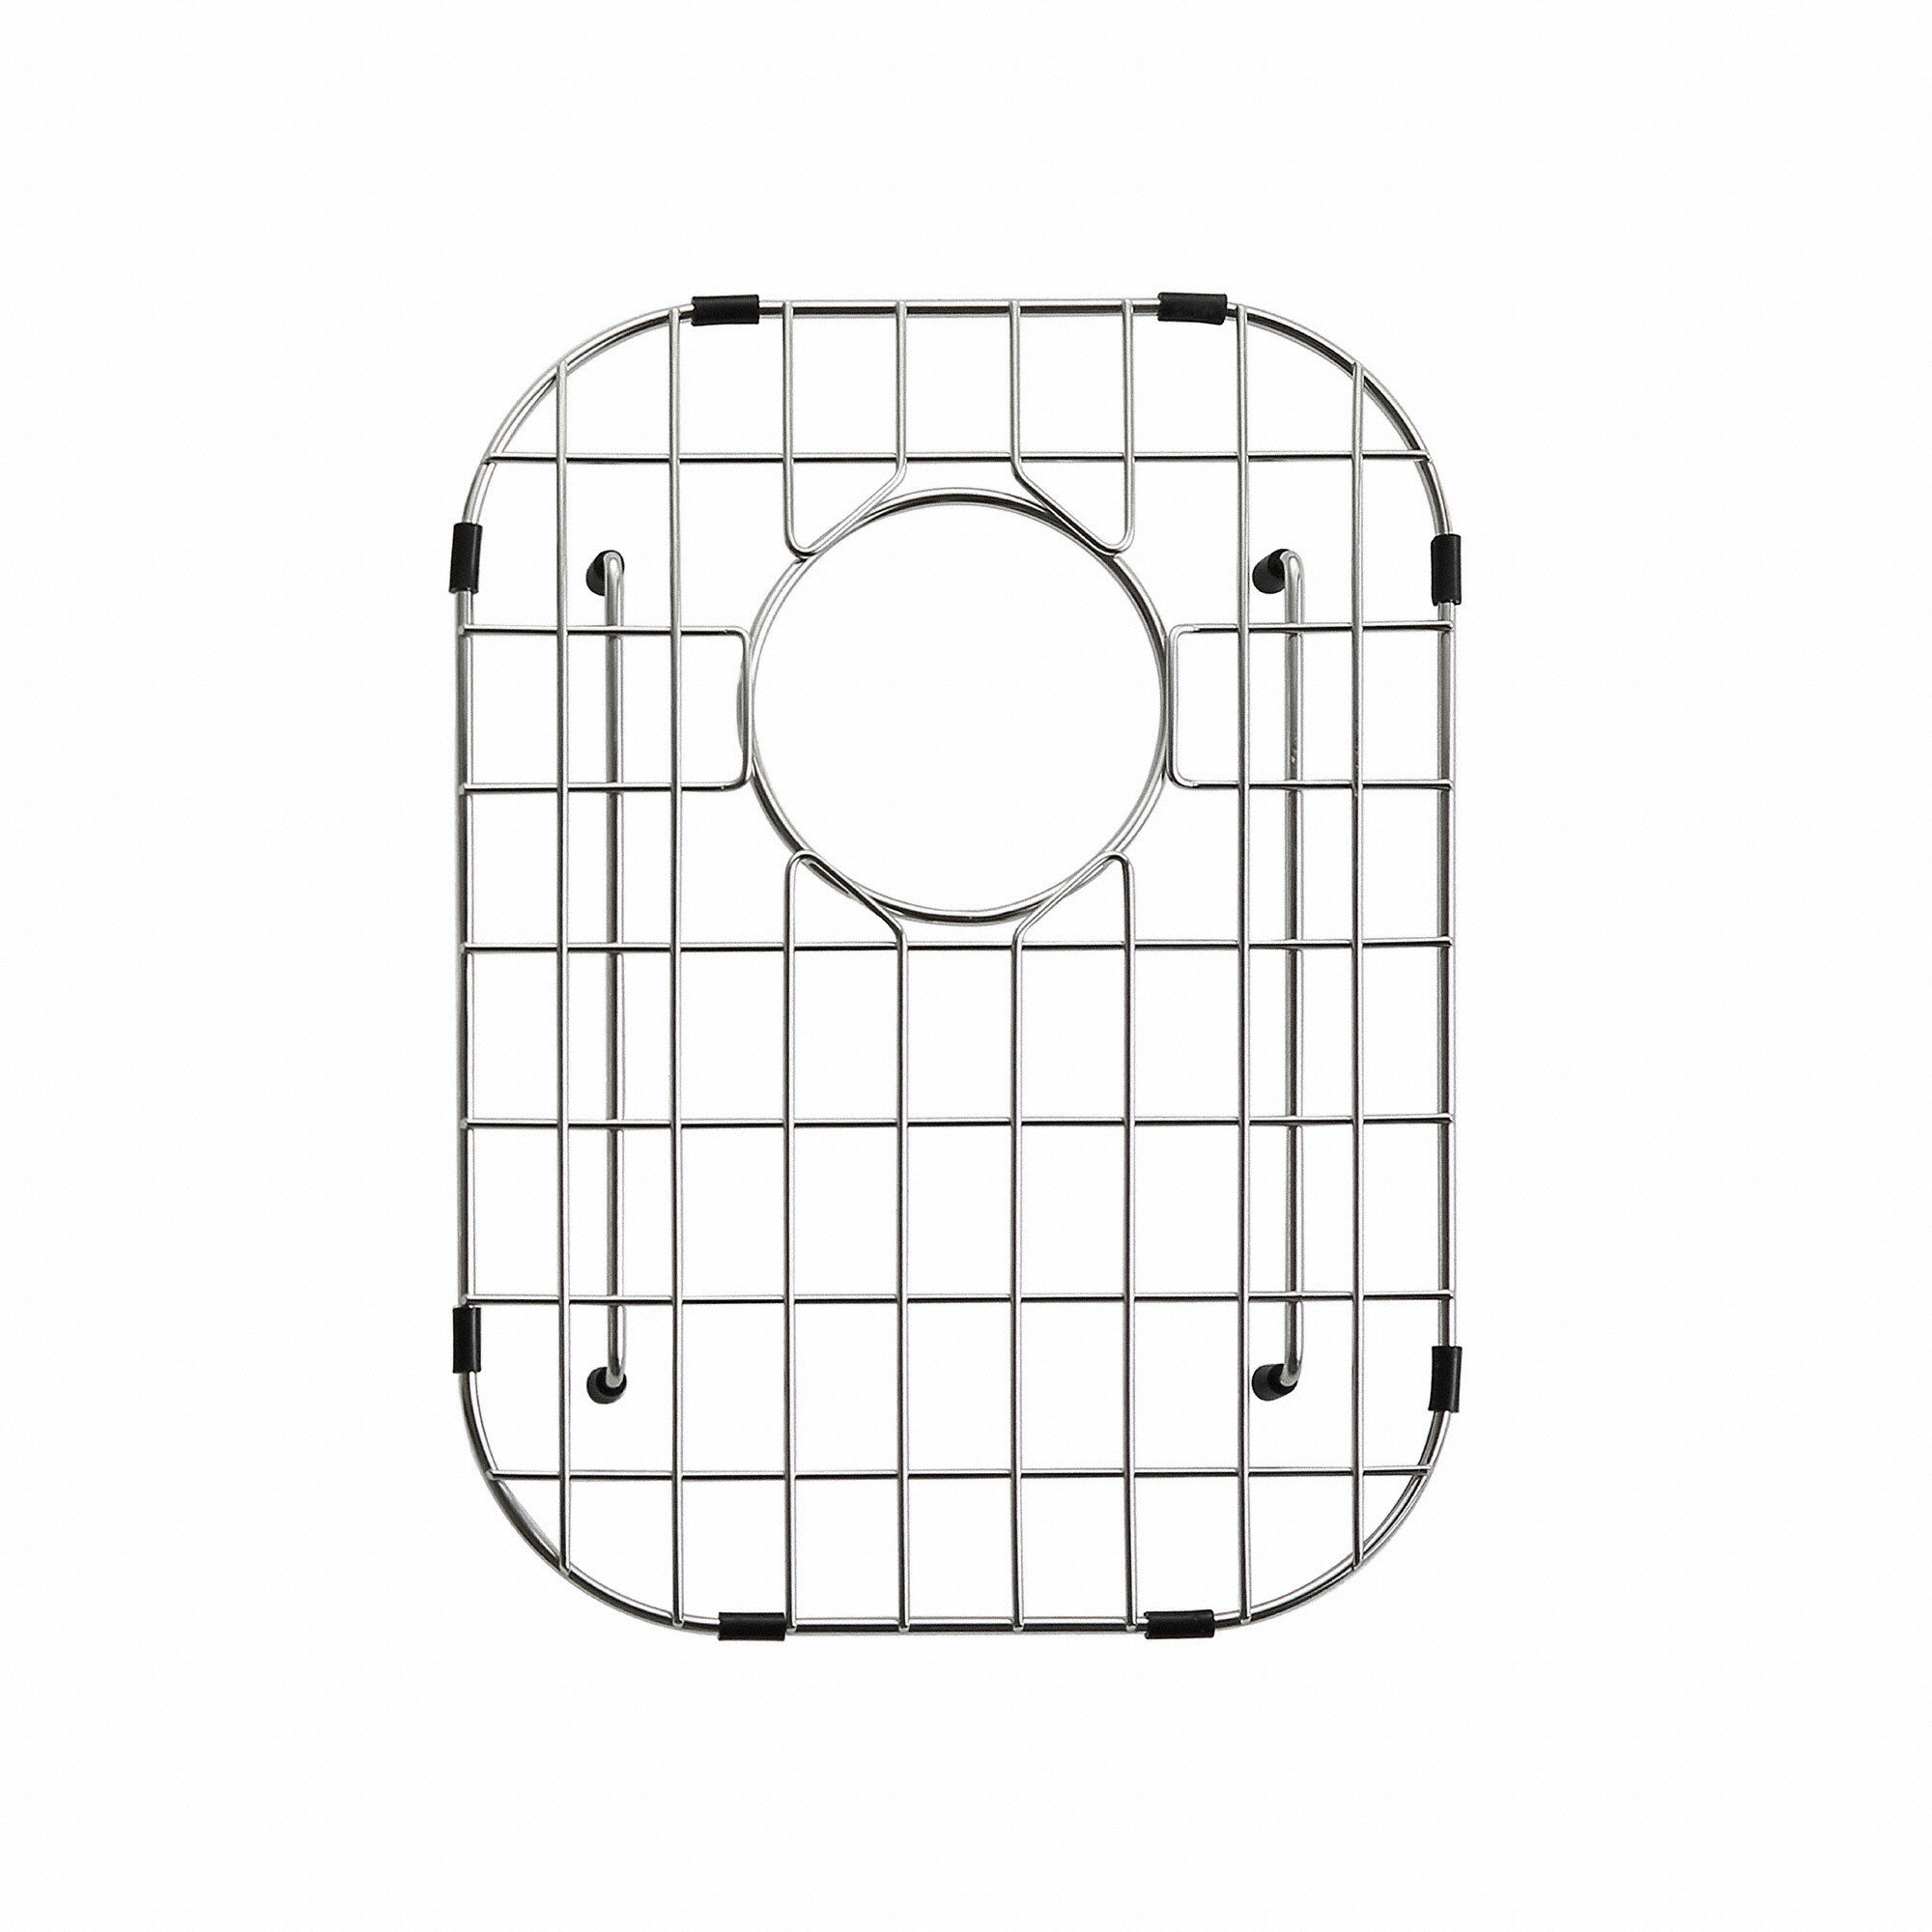 KRAUS Stainless Steel Bottom Grid for KBU24 Right (Small) Bowl 32” Kitchen Sink, 11 1/8” x 15” x 1”, KBG-24-2